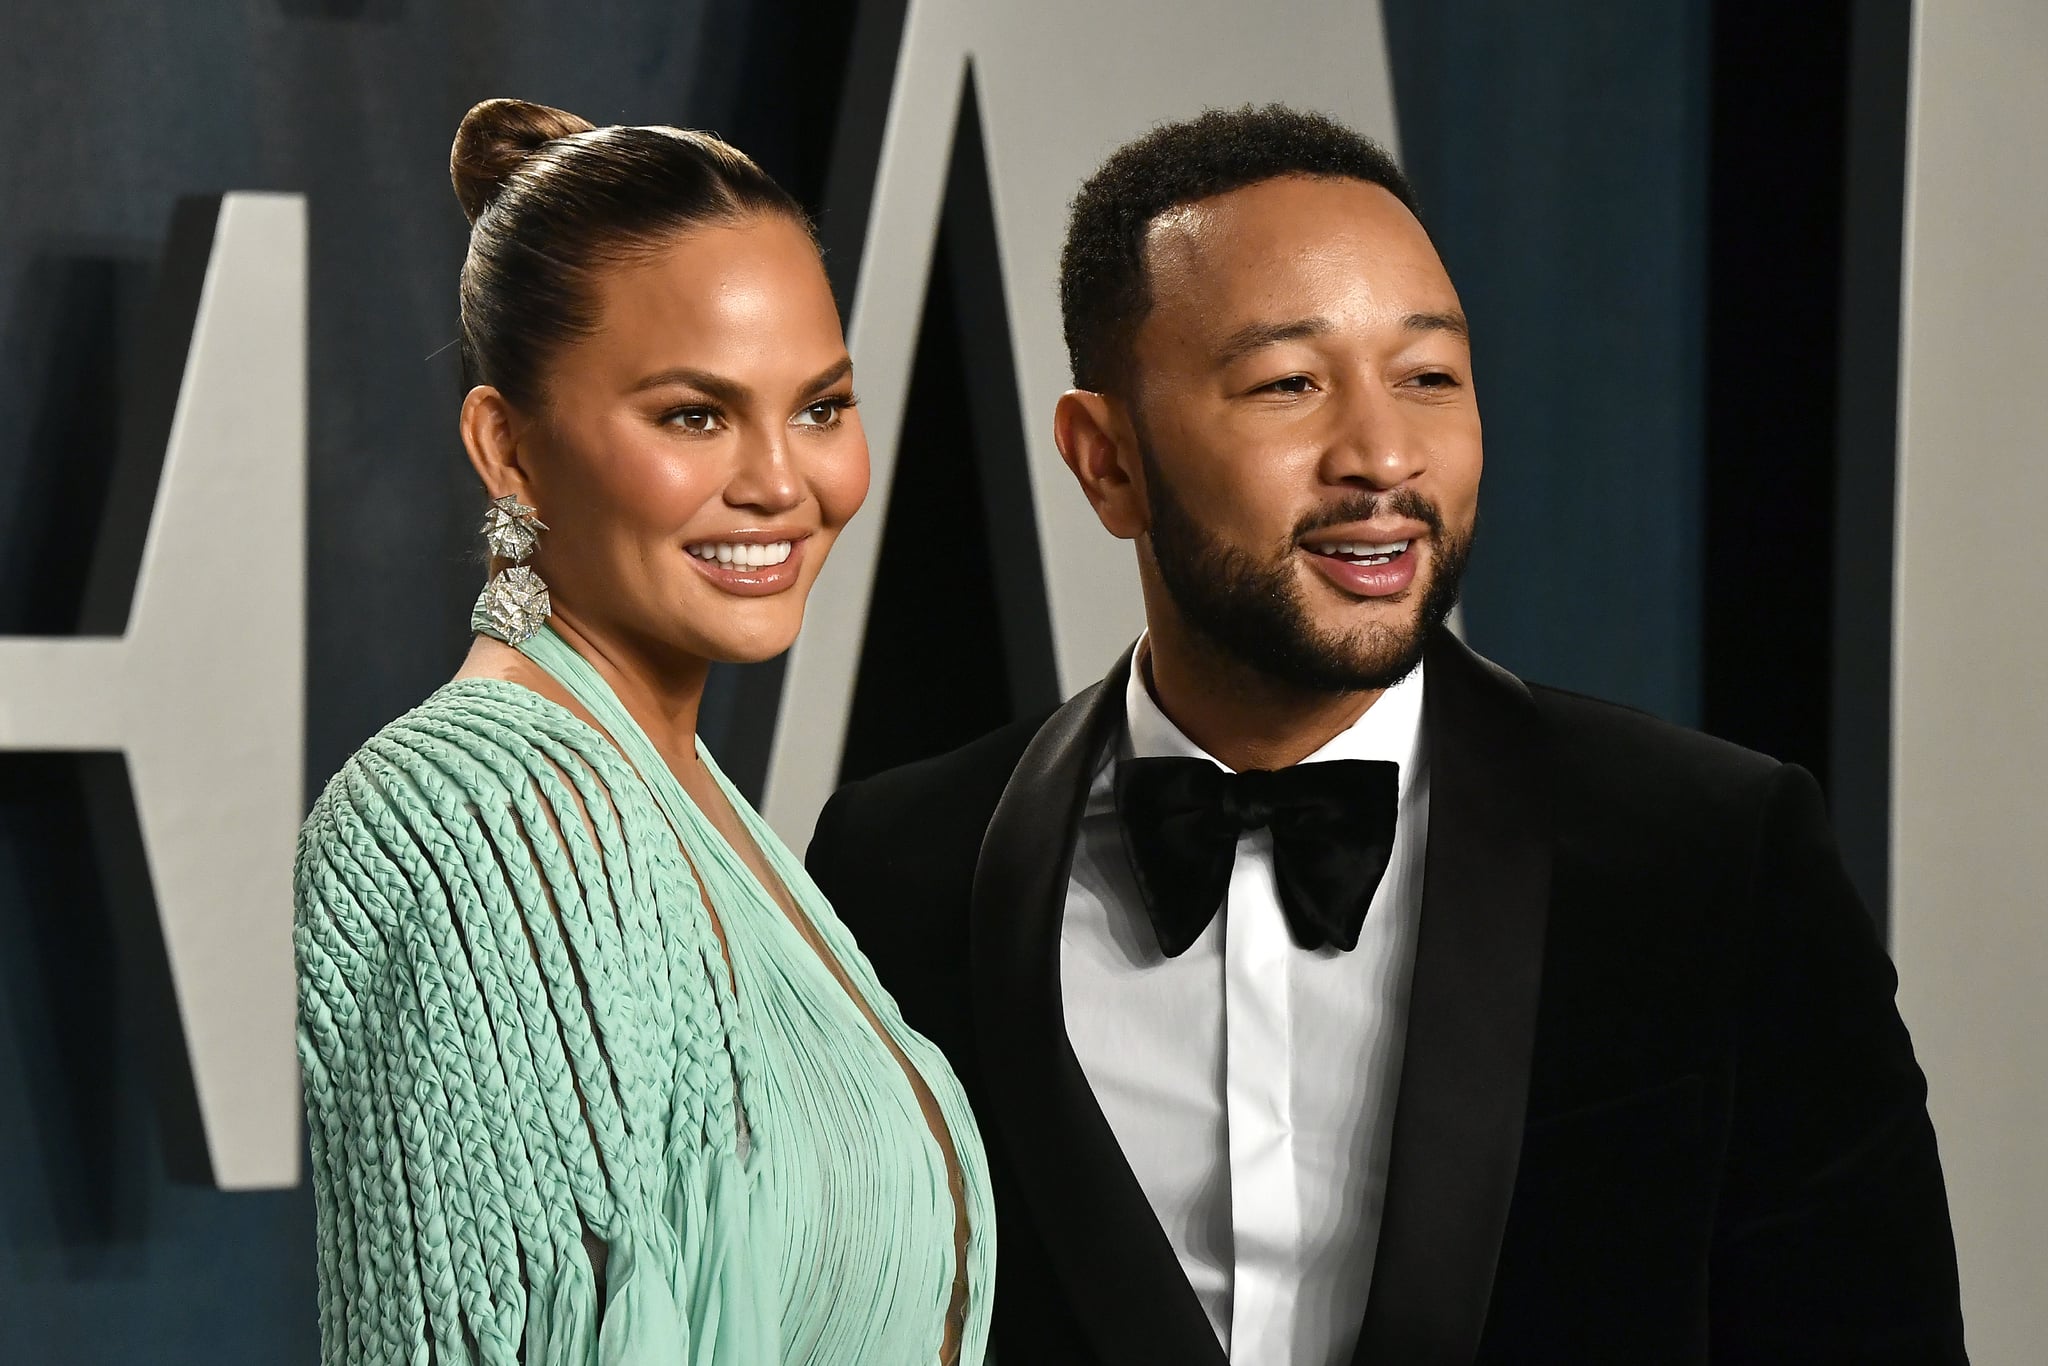 Chrissy Teigen and John Legend attend the 2020 Vanity Fair Oscar Party in Beverly Hills, California.